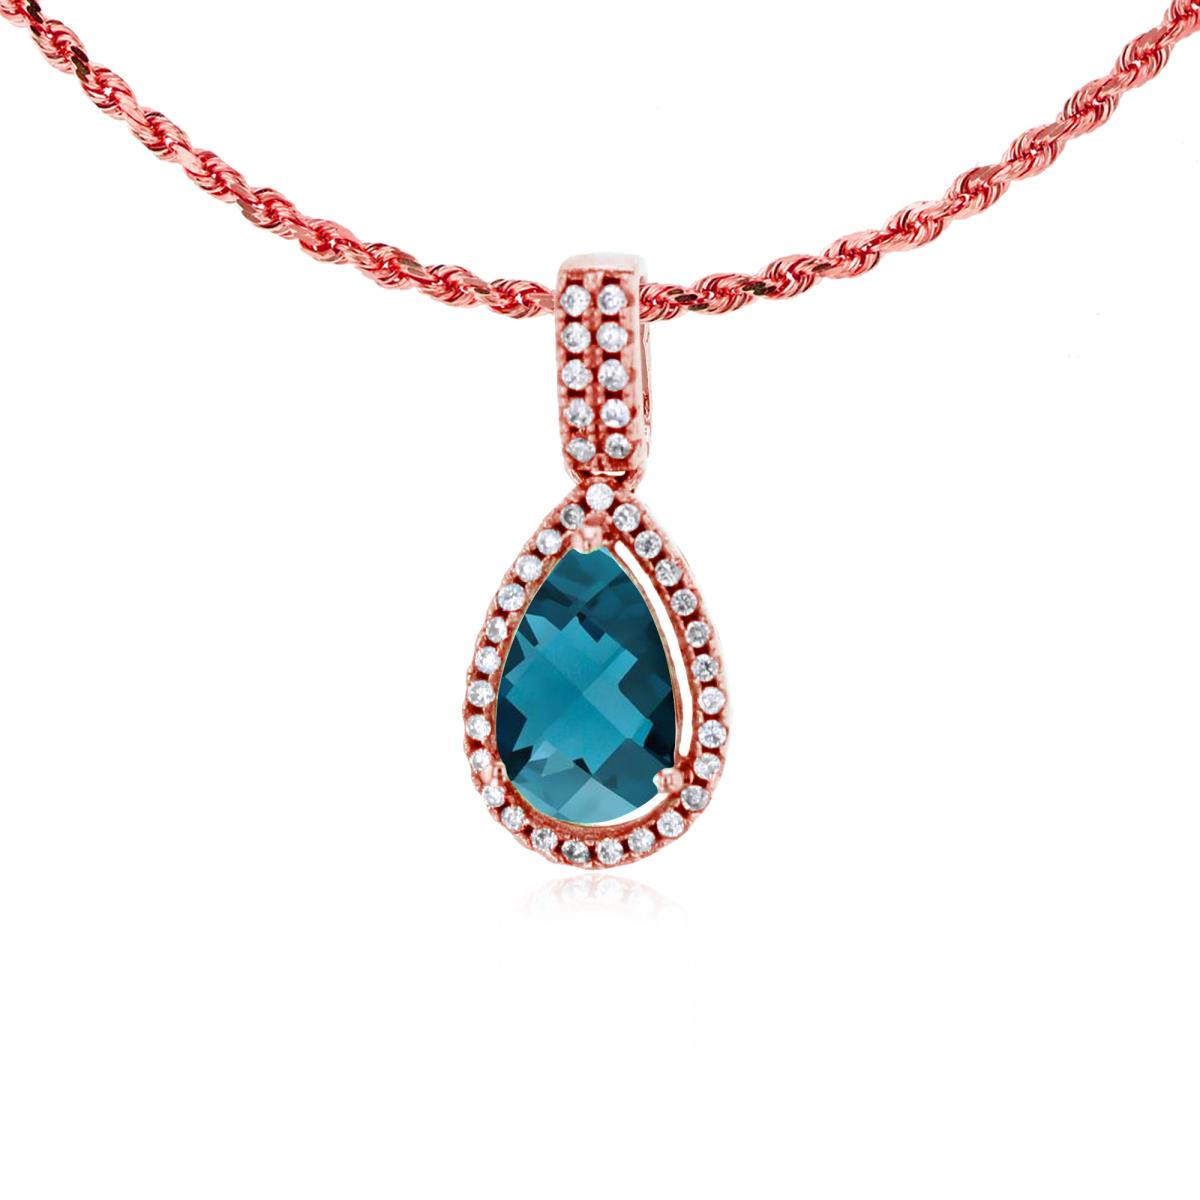 10K Rose Gold 8x5mm Pear Cut London Blue Topaz & 0.11 CTTW Diamond Halo 18" Rope Chain Necklace